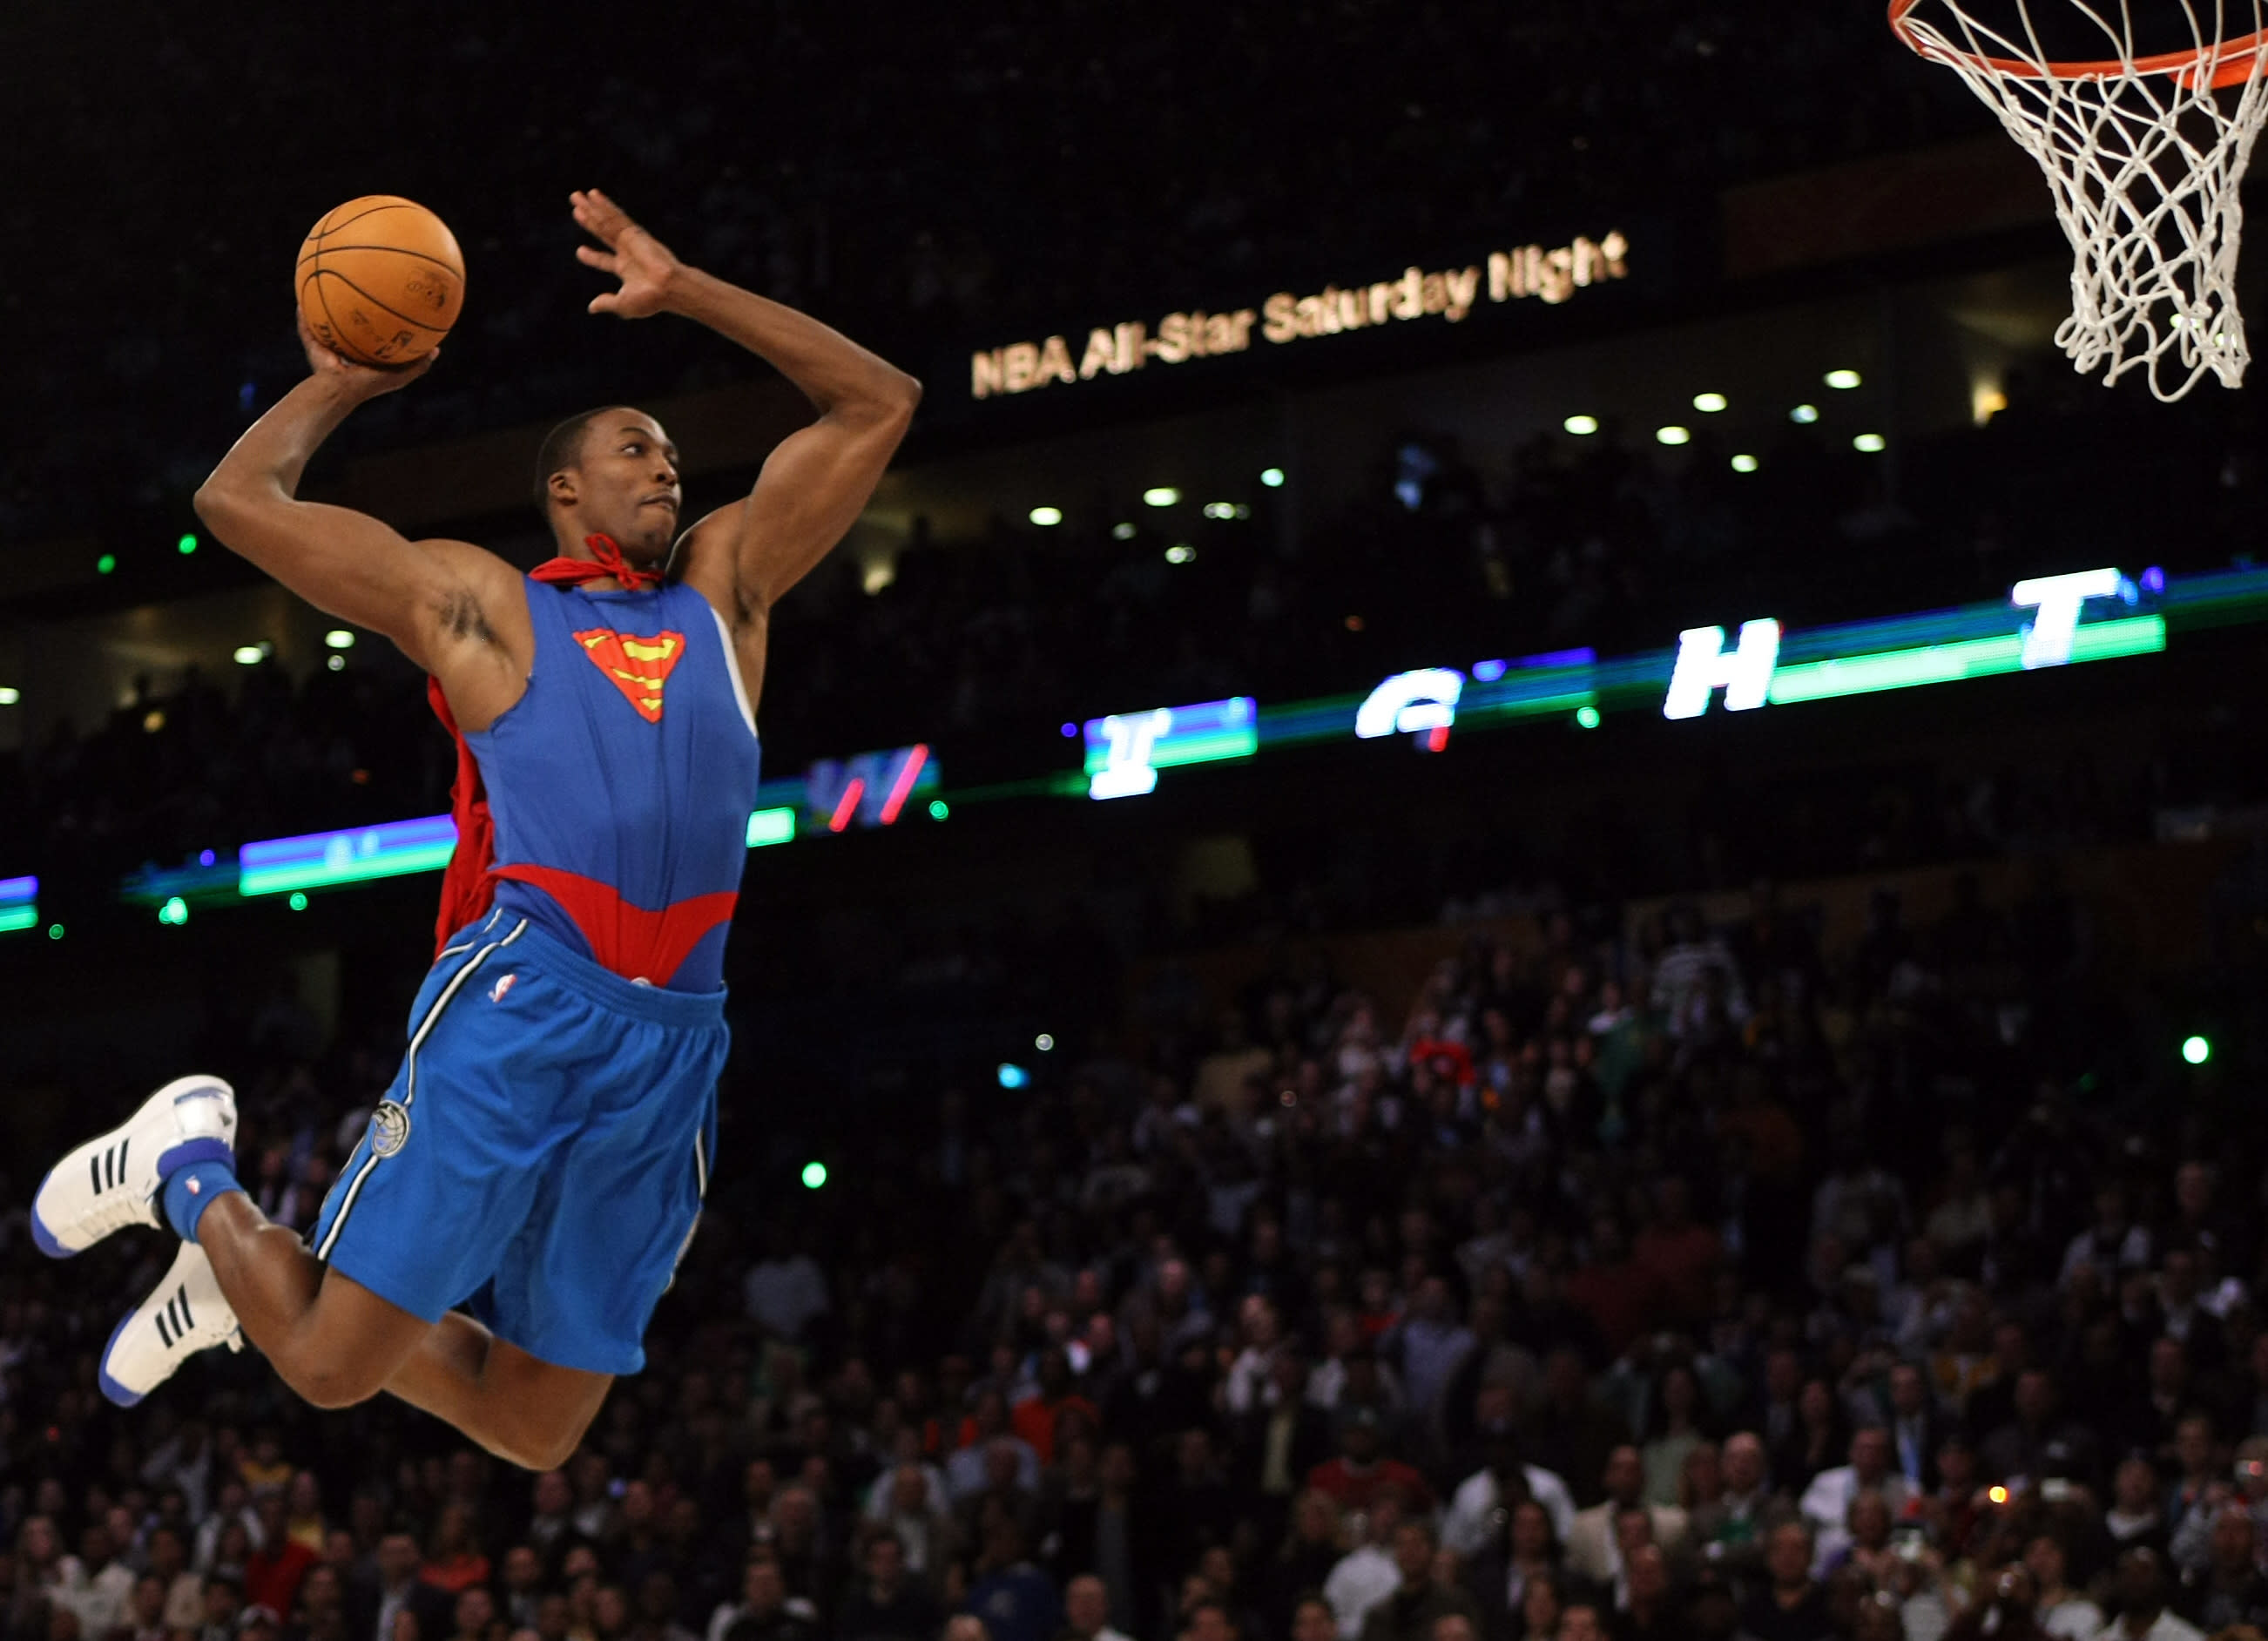 NBA Slam Dunk Contest 2022  Dwight Howard is back but is 